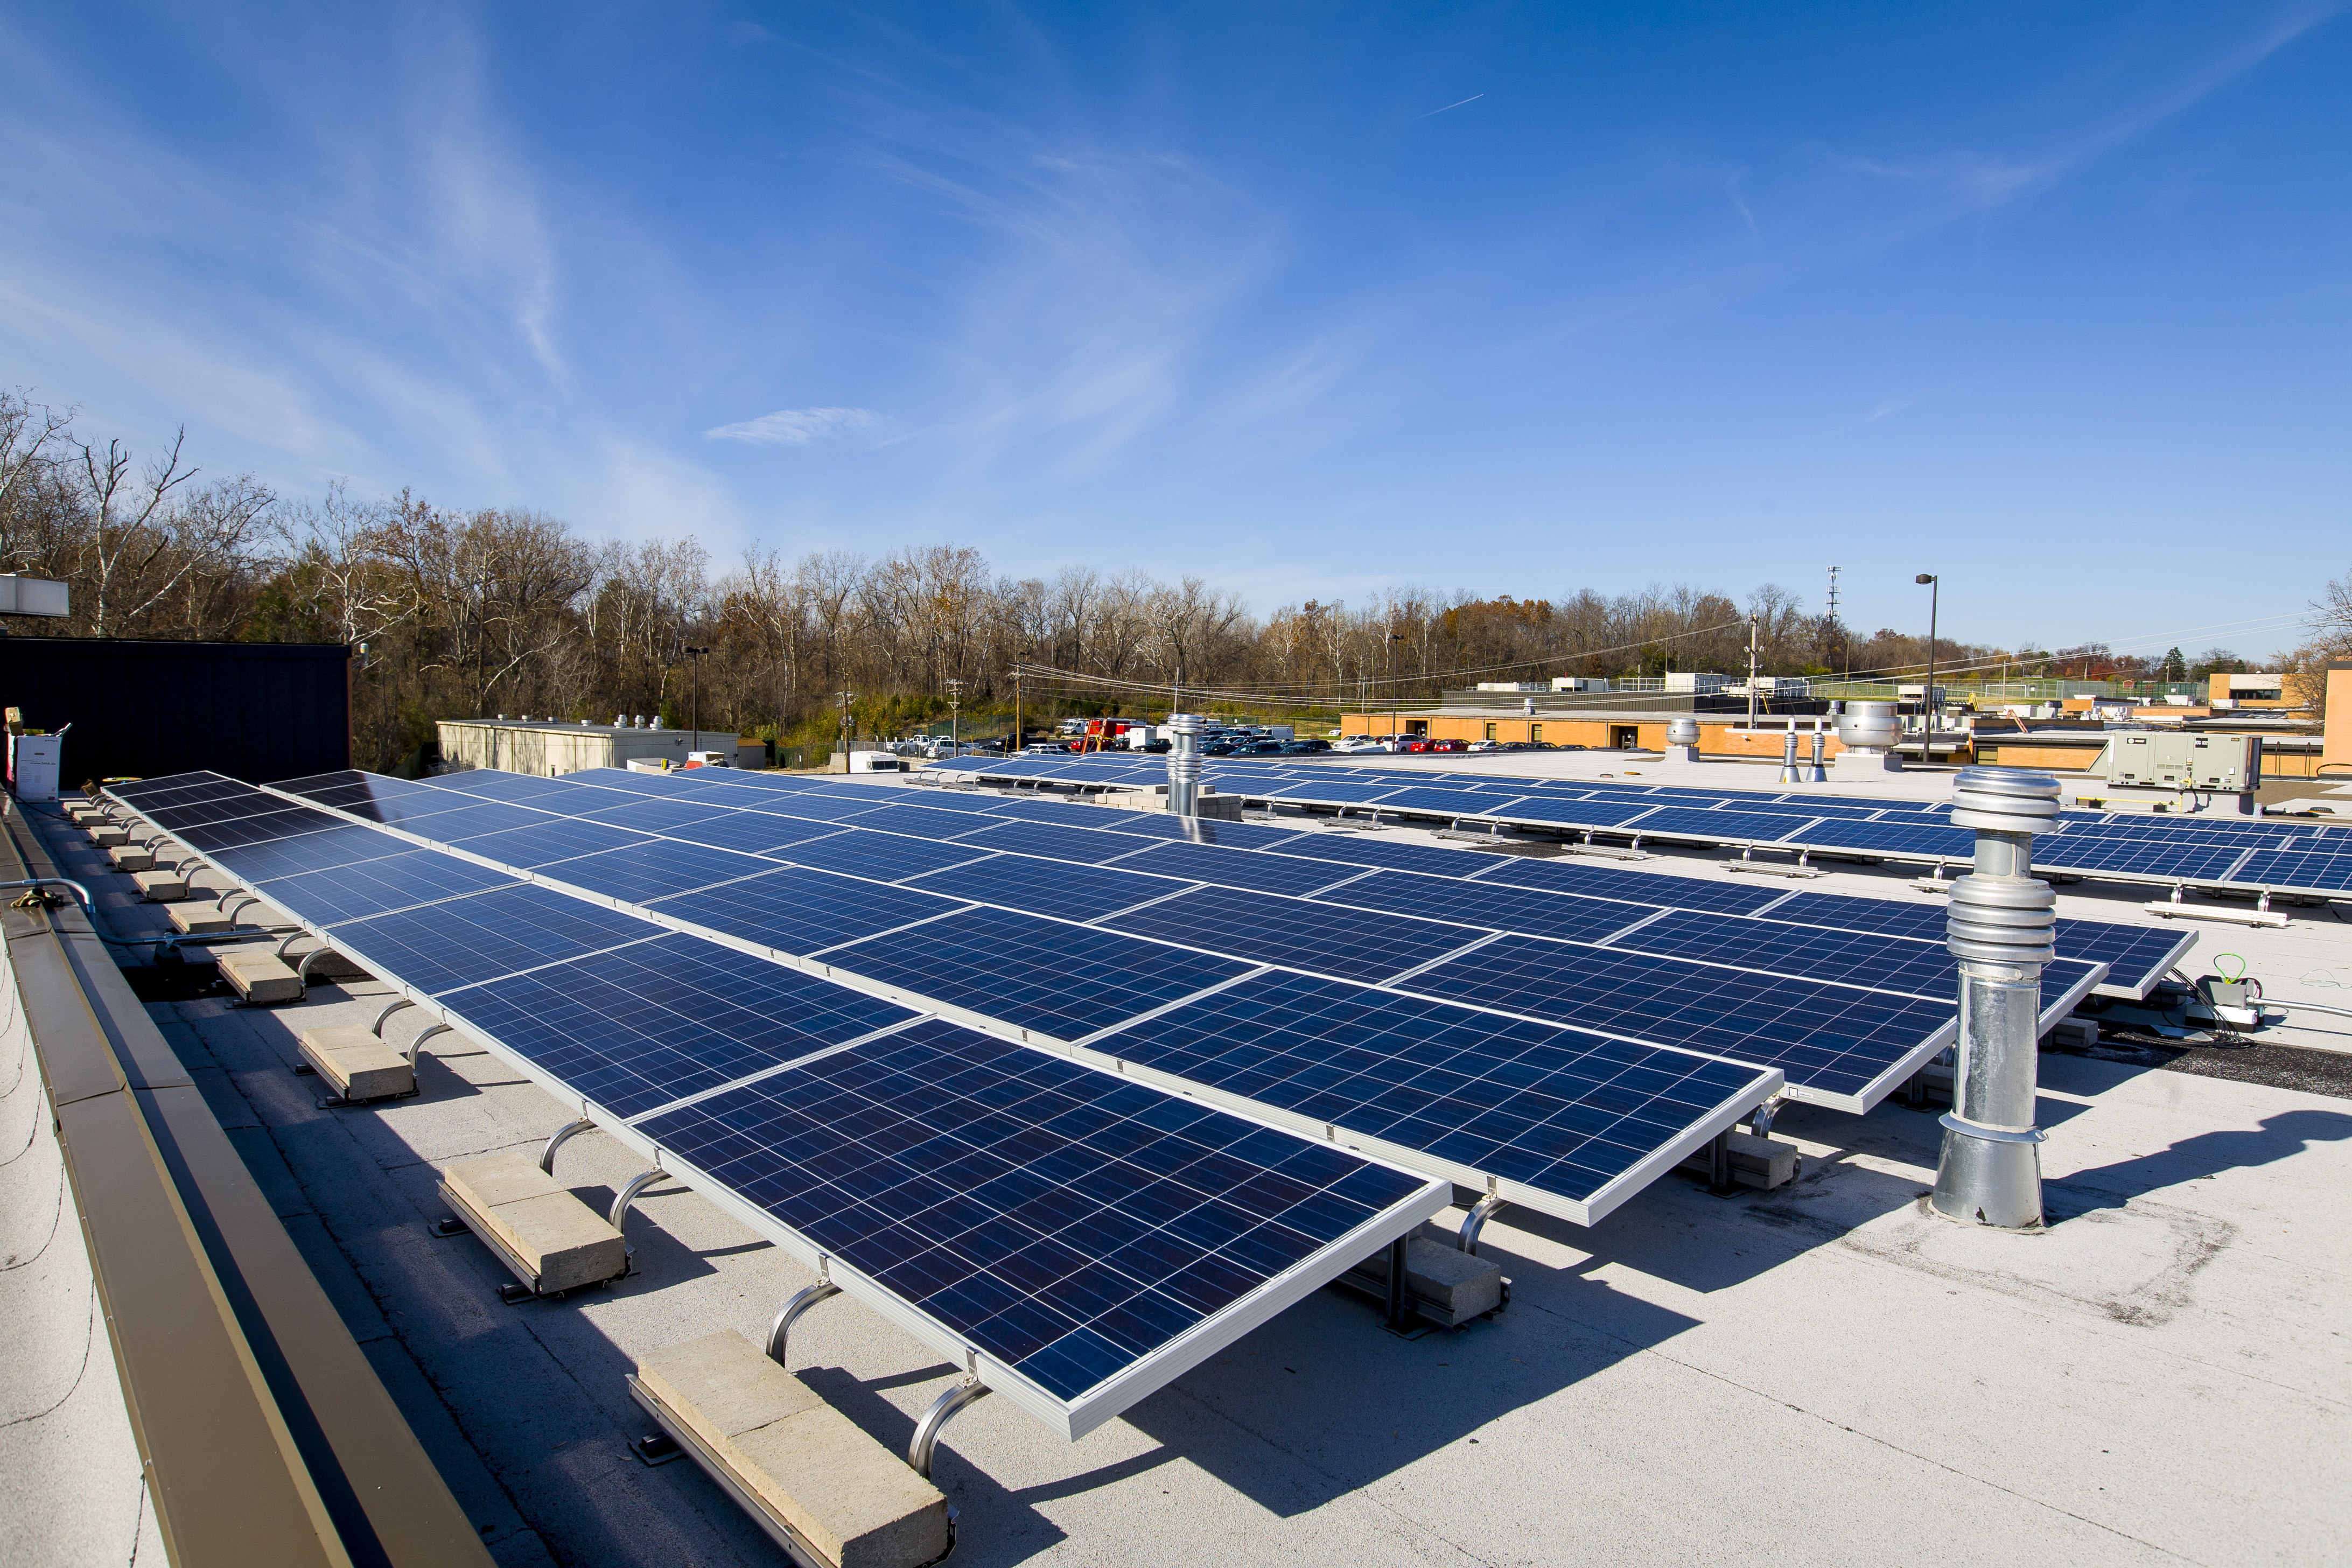 Brentwood, MRH school districts to install solar panels; will supply power, be educational